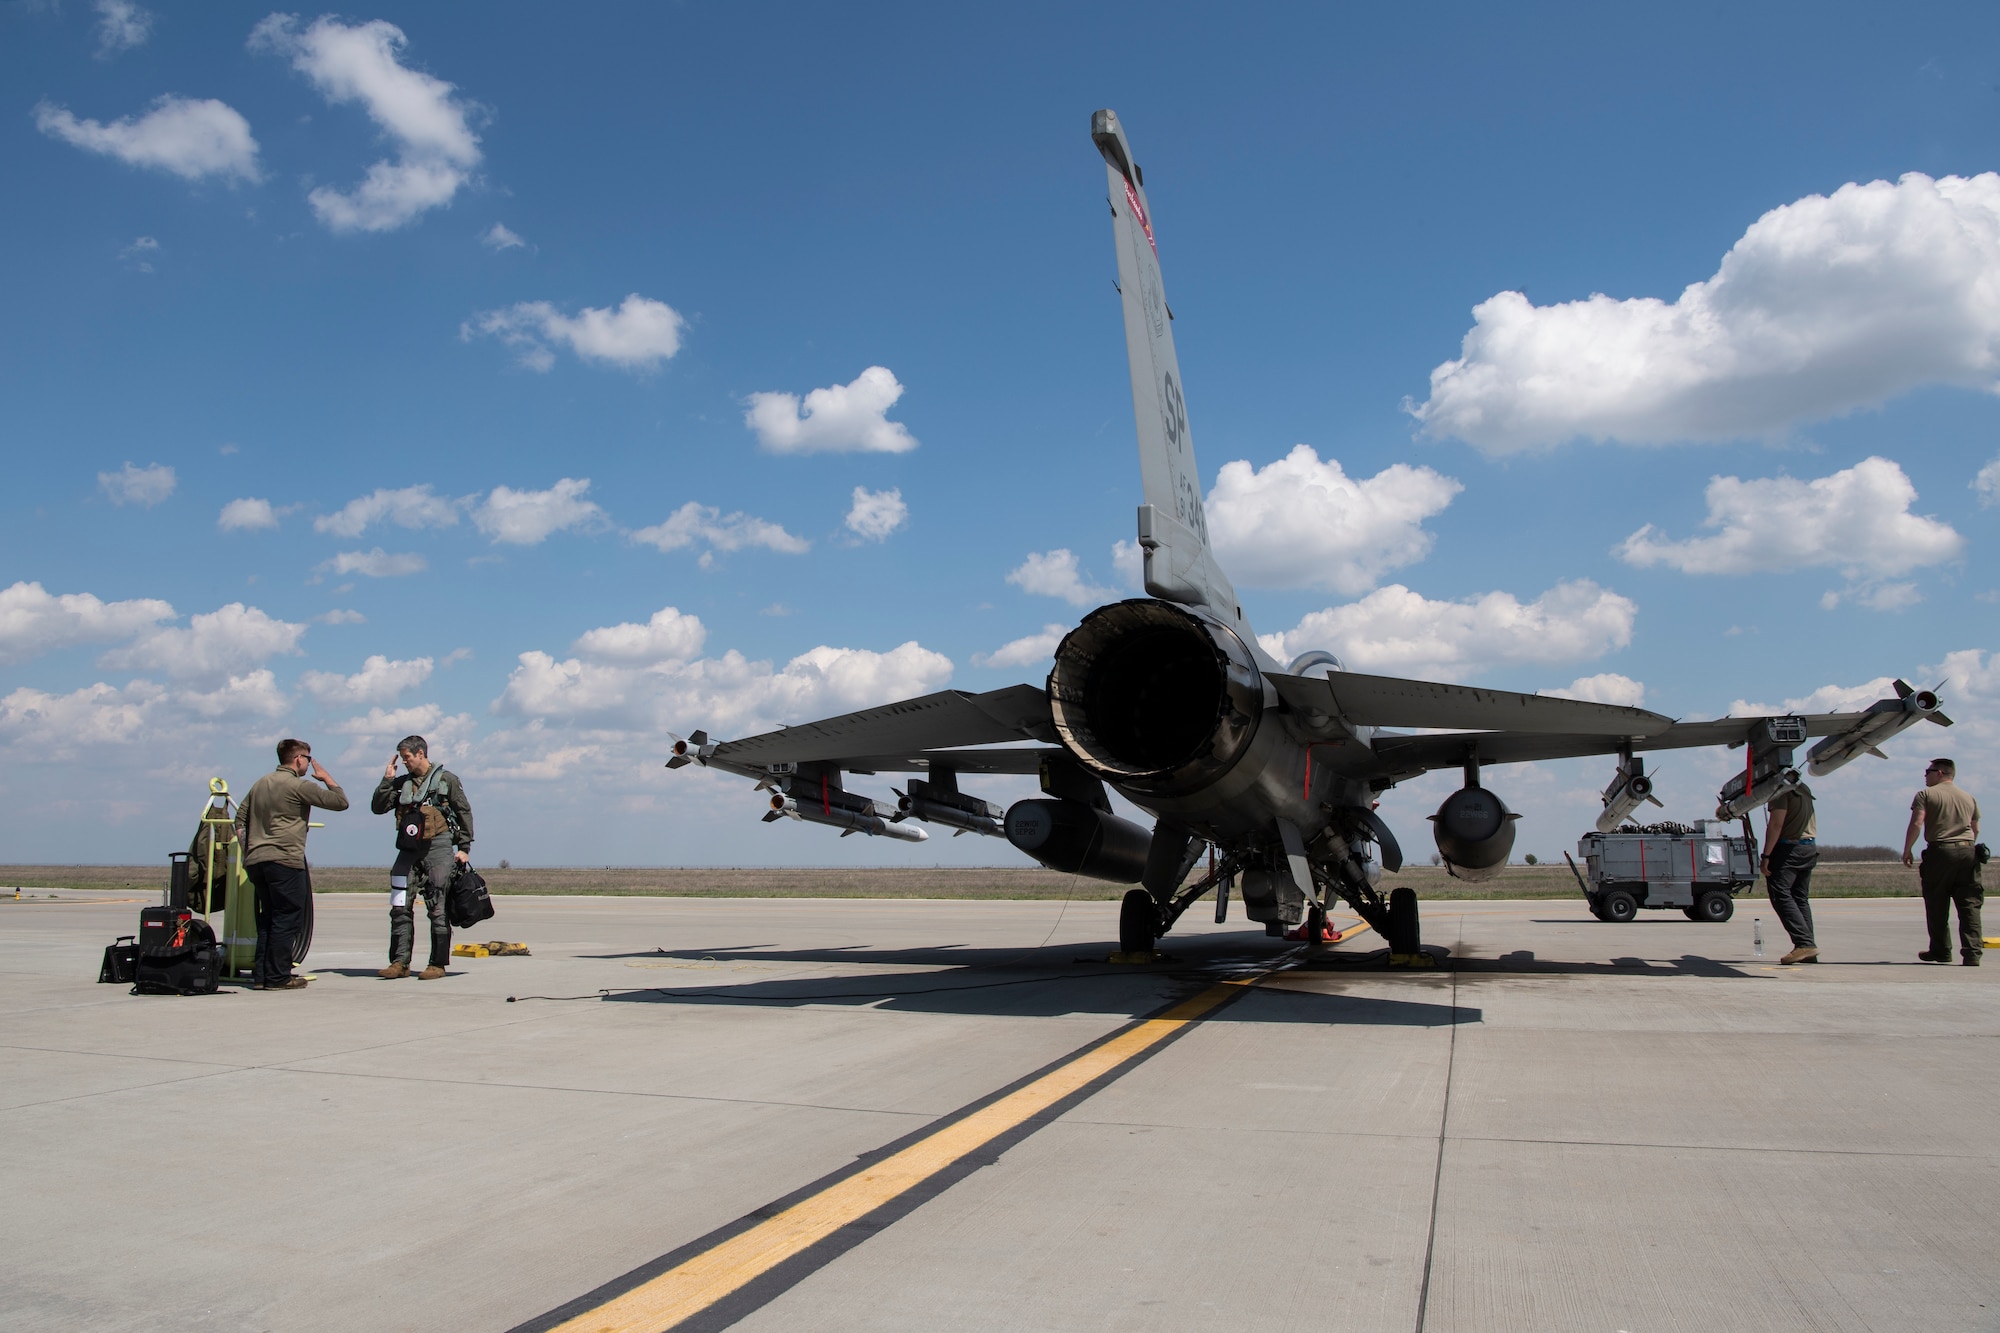 Airmen salute next to an F-16 Fighting Falcon fighter jet.